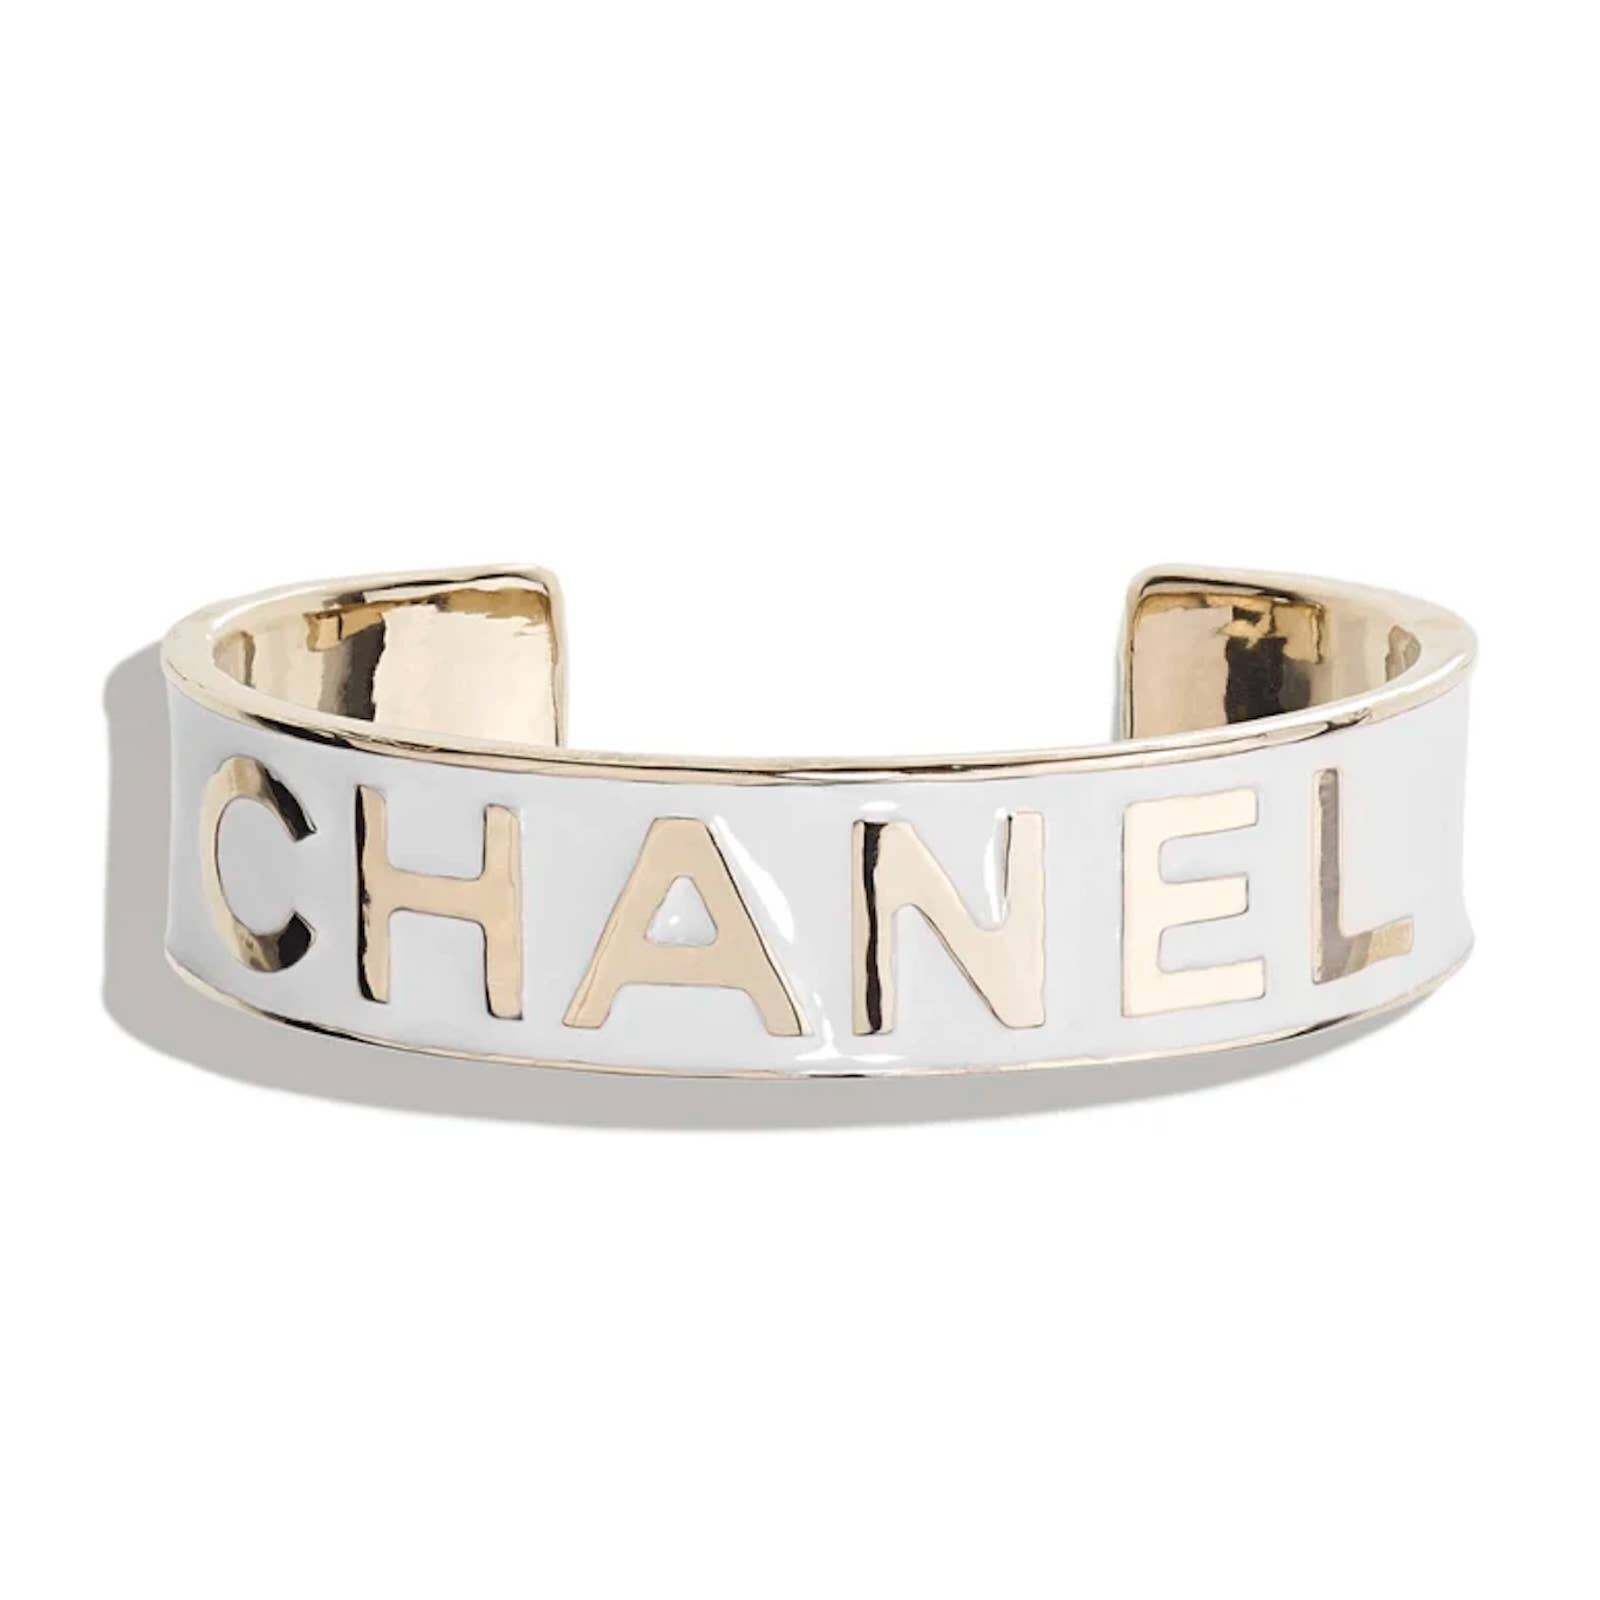 Chanel - Authenticated CC Bracelet - Metal Gold for Women, Very Good Condition